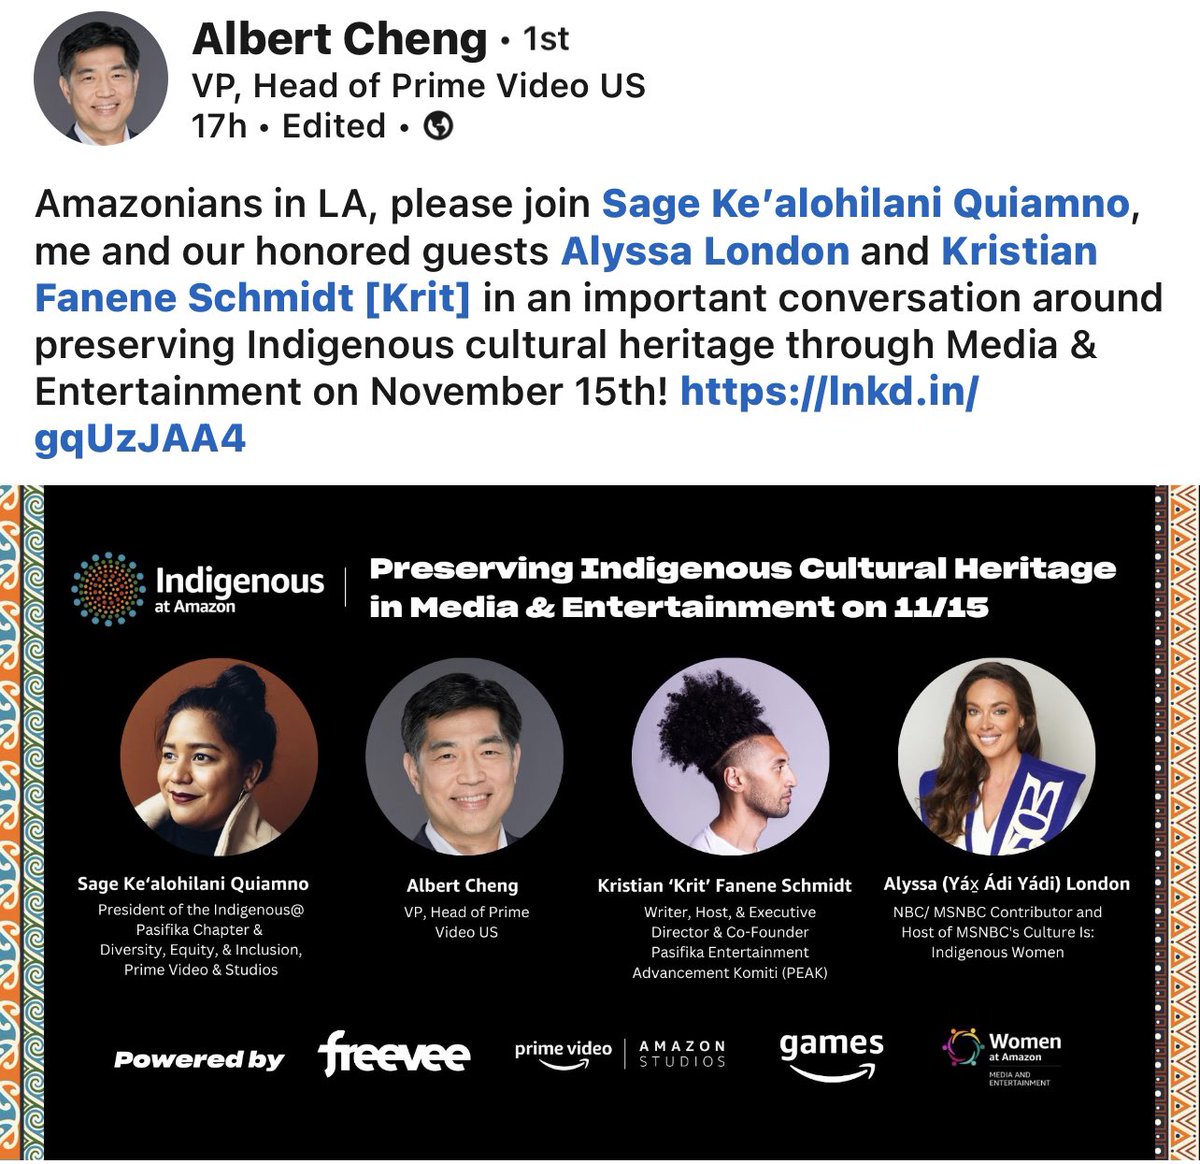 Looking forward to this event with @amazon. Thank you Sage Ke’alohilani Quiamno for the opportunity. It’s an honor to speak alongside both Albert Cheng and Kristian Fanene Schmidt [Krit] about increasing the awareness of the vitality of Indigenous culture through media content.